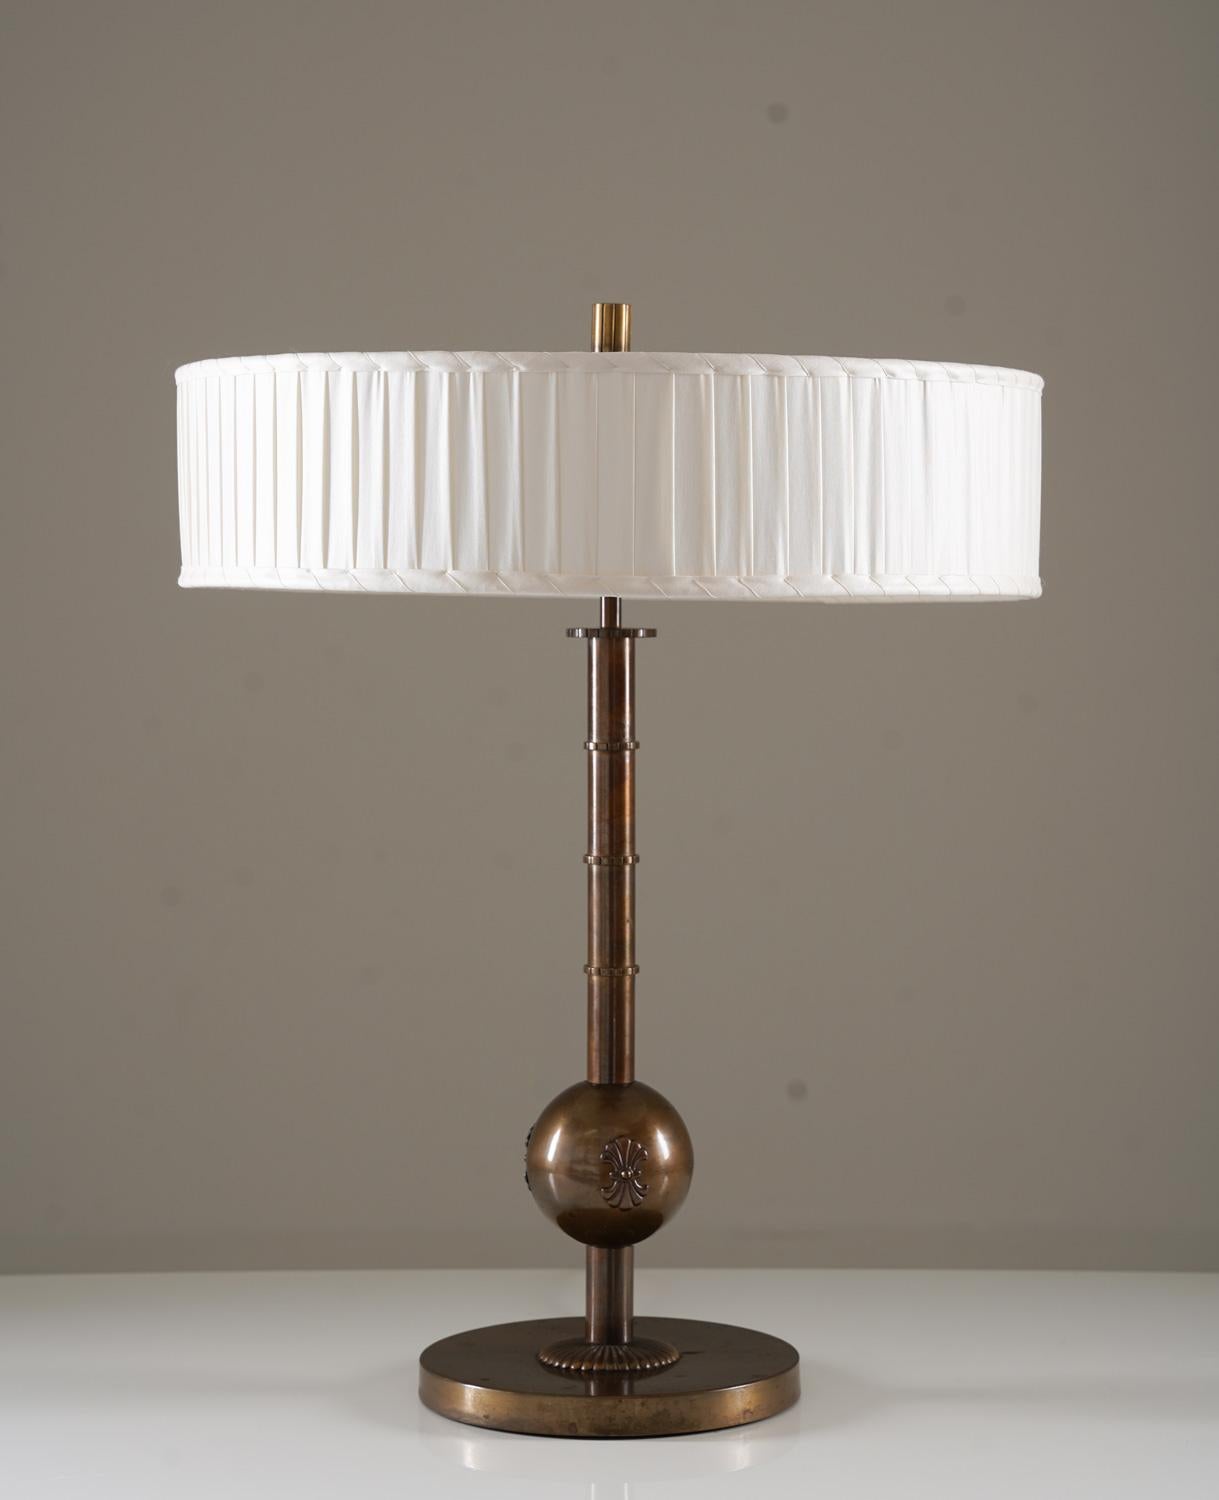 Large table lamp manufactured by Böhlmarks, Sweden, 1930s. 
This elegant lamp was manufactured during the Swedish Modern era and is of very high quality.
It consists of a heavy oxidised brass base, supporting an ornamented rod with four light